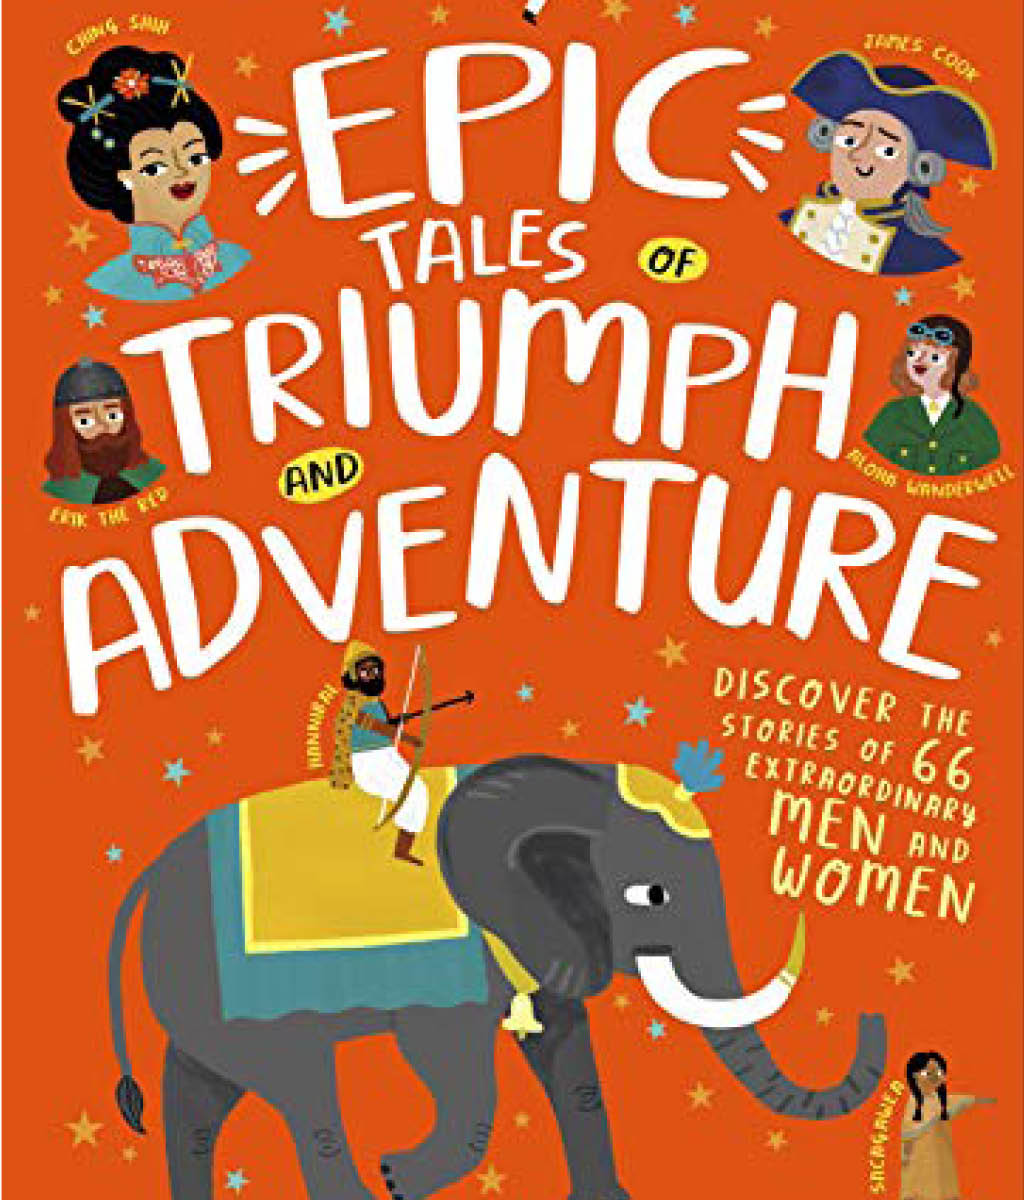 Epic Tales of Triumph and Adventure by Simon Cheshire